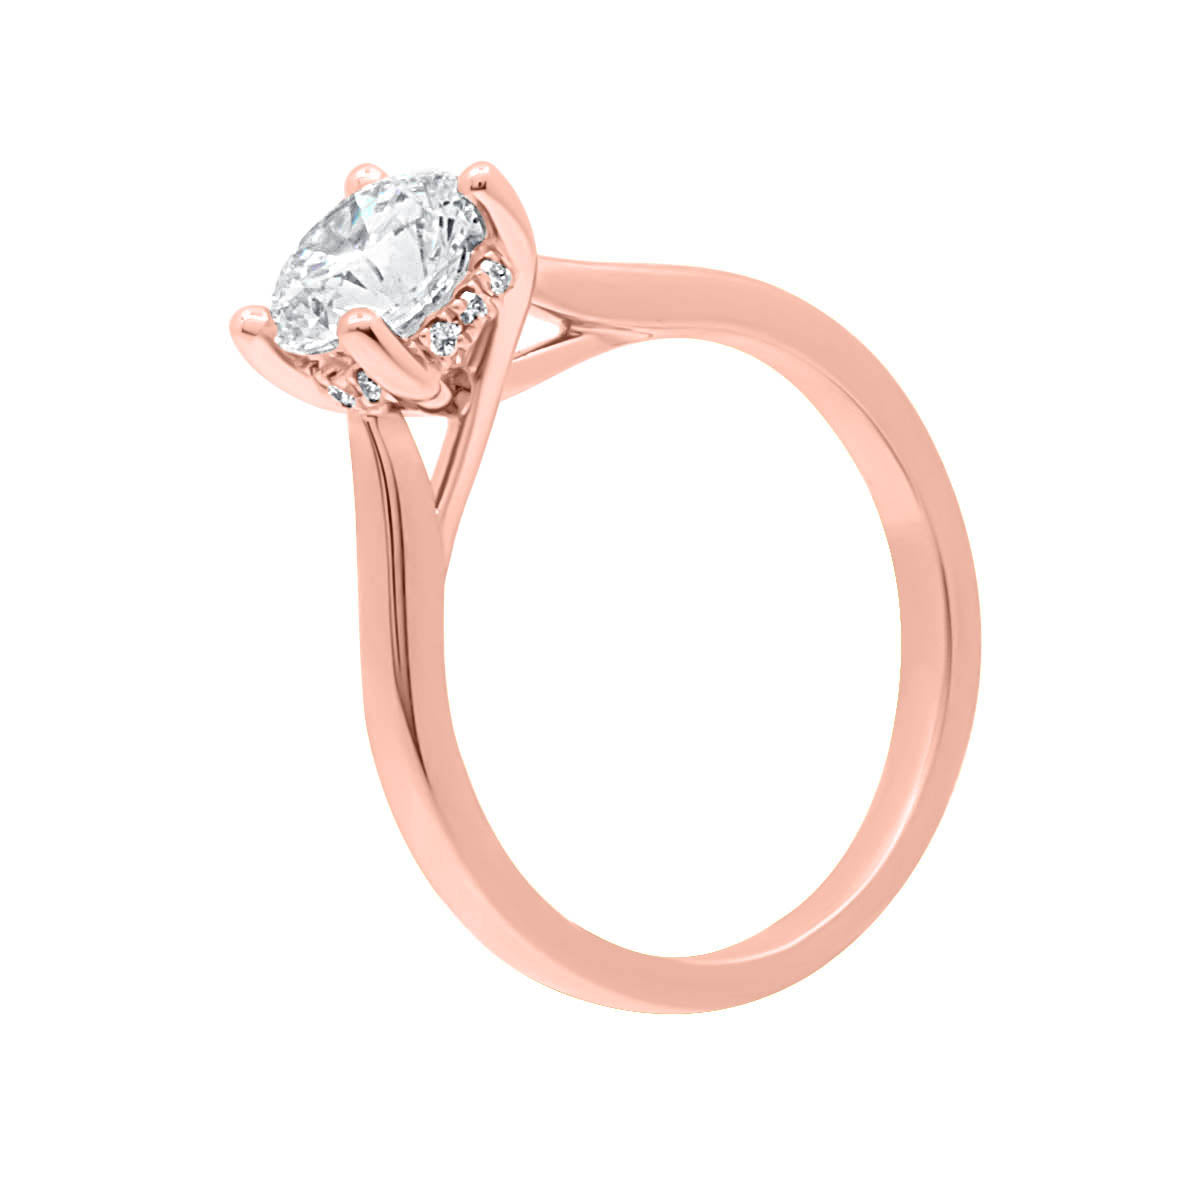 Hidden Halo Solitaire Engagement Ring in rose gold and upright position angled